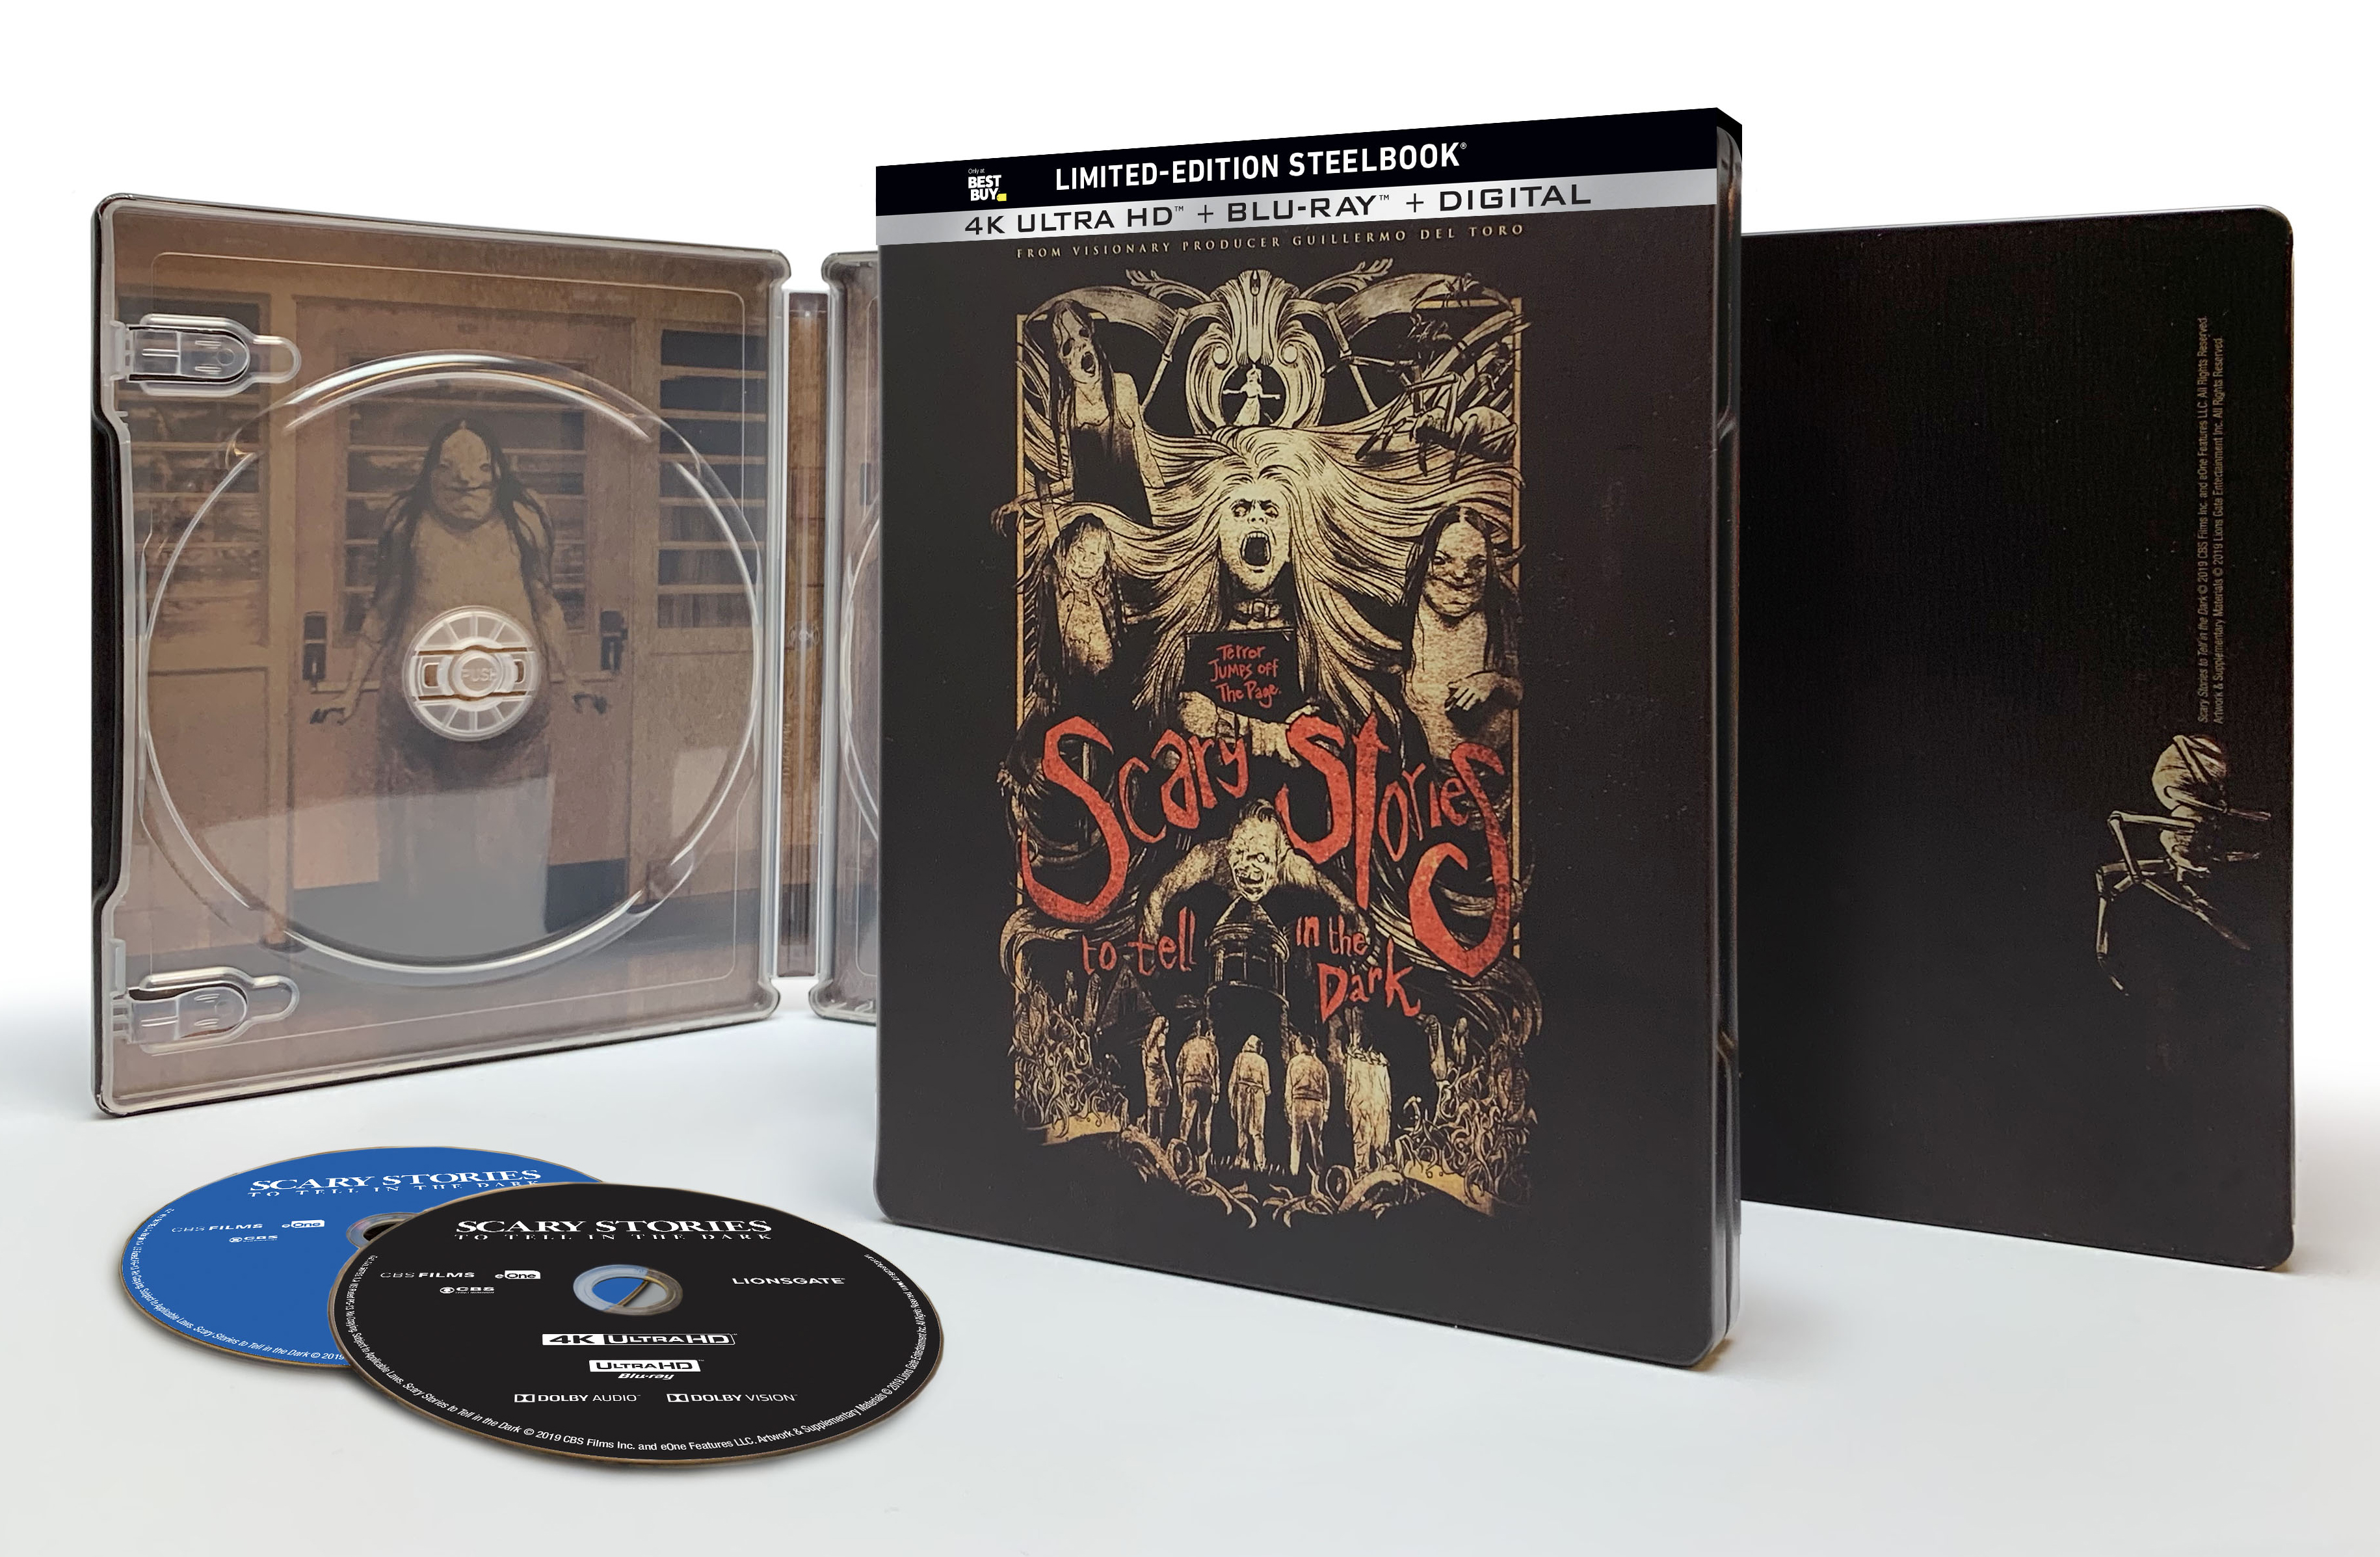 4K Ultra HD + Blu-ray + Digital HD Limited Edition Steelbook Scary Stories to Tell in the Dark